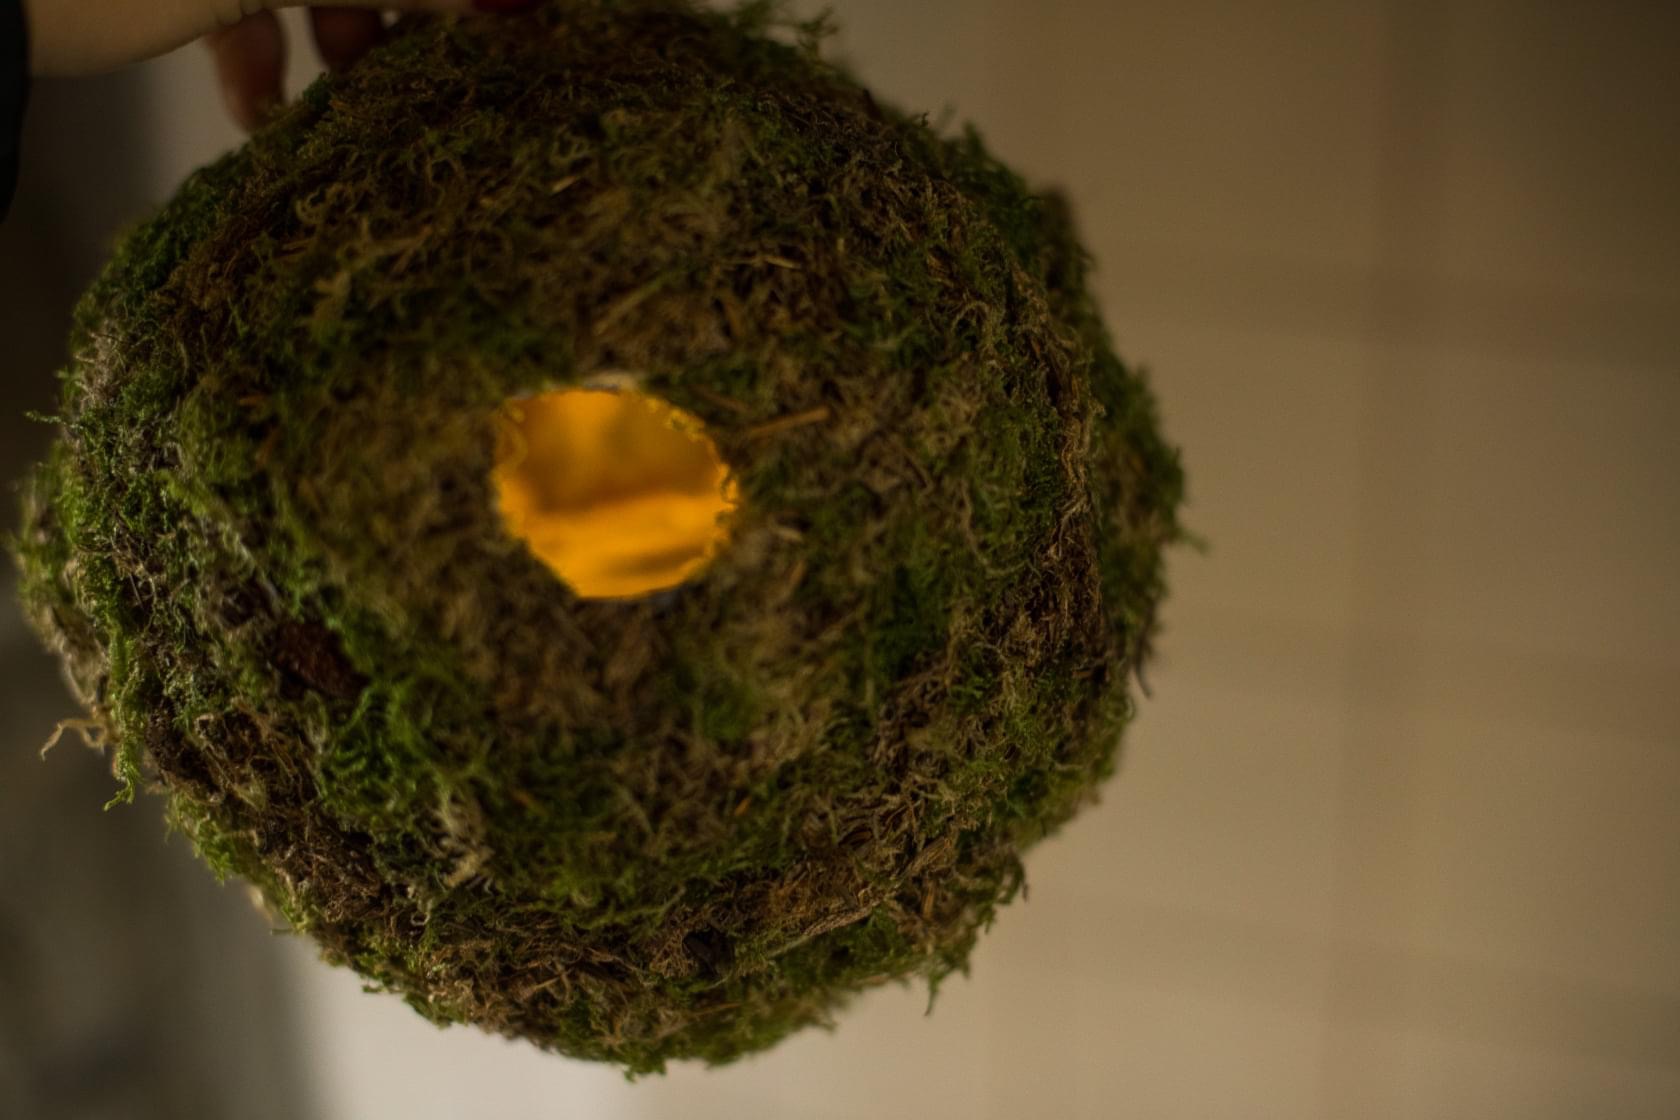 moss, paper, acrylic paint, iron wire, diameter approx 20 - 25 cm, 2020